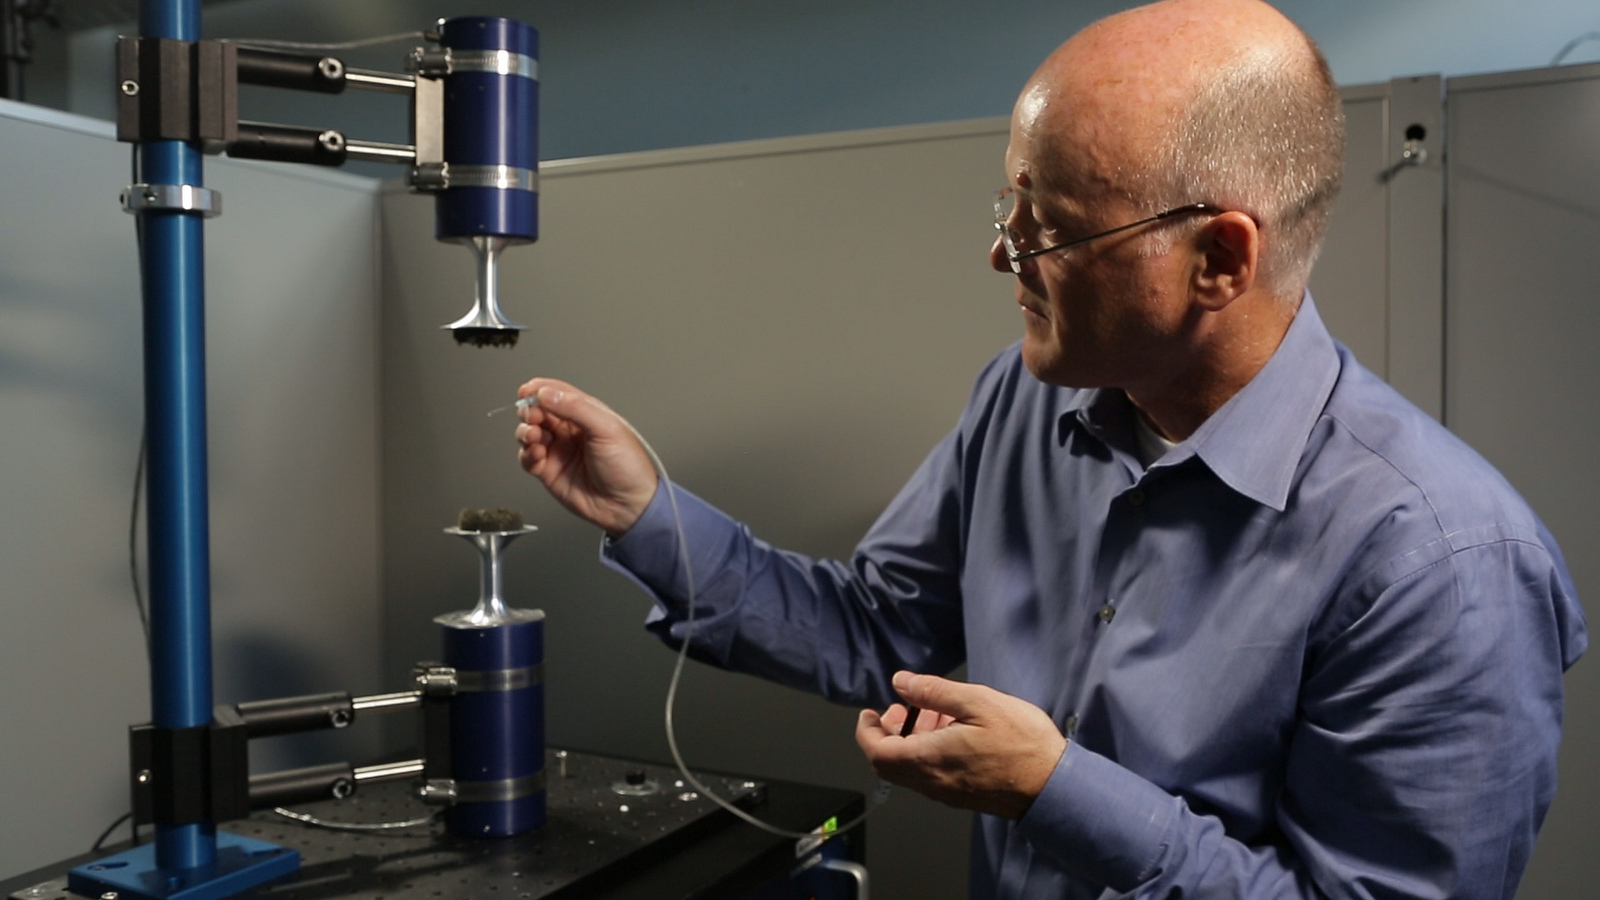 Argonne scientist Chris Benmore demonstrates his acoustic levitator, which could help to improve the efficiency and quality of pharmaceutical development. (Photo by Dan Harris)